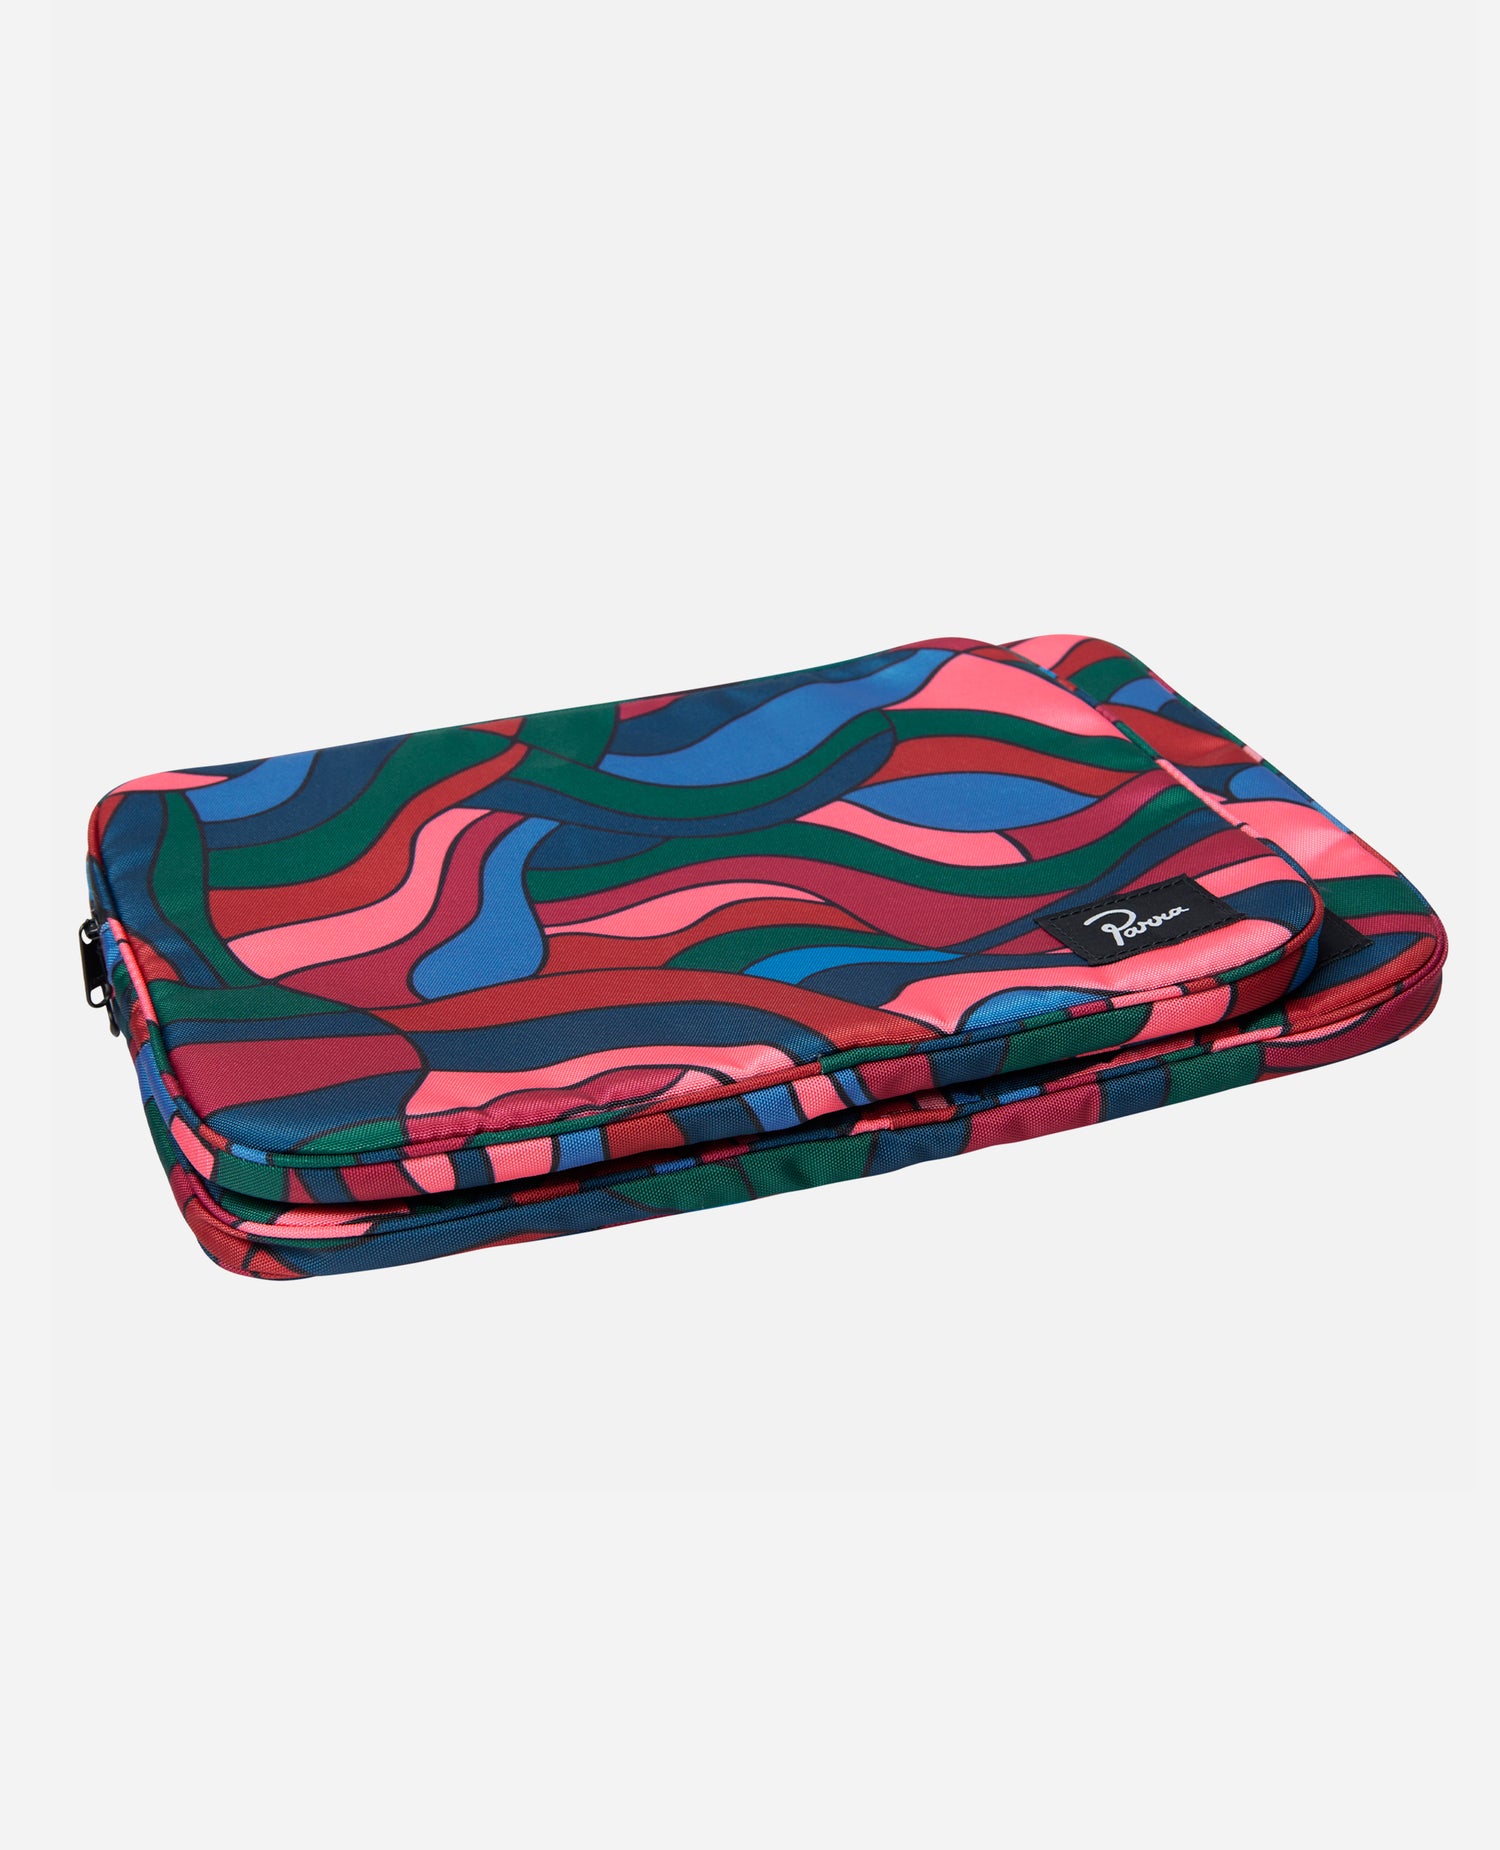 byParra Distorted Waves Laptop Sleeve (14 inch)